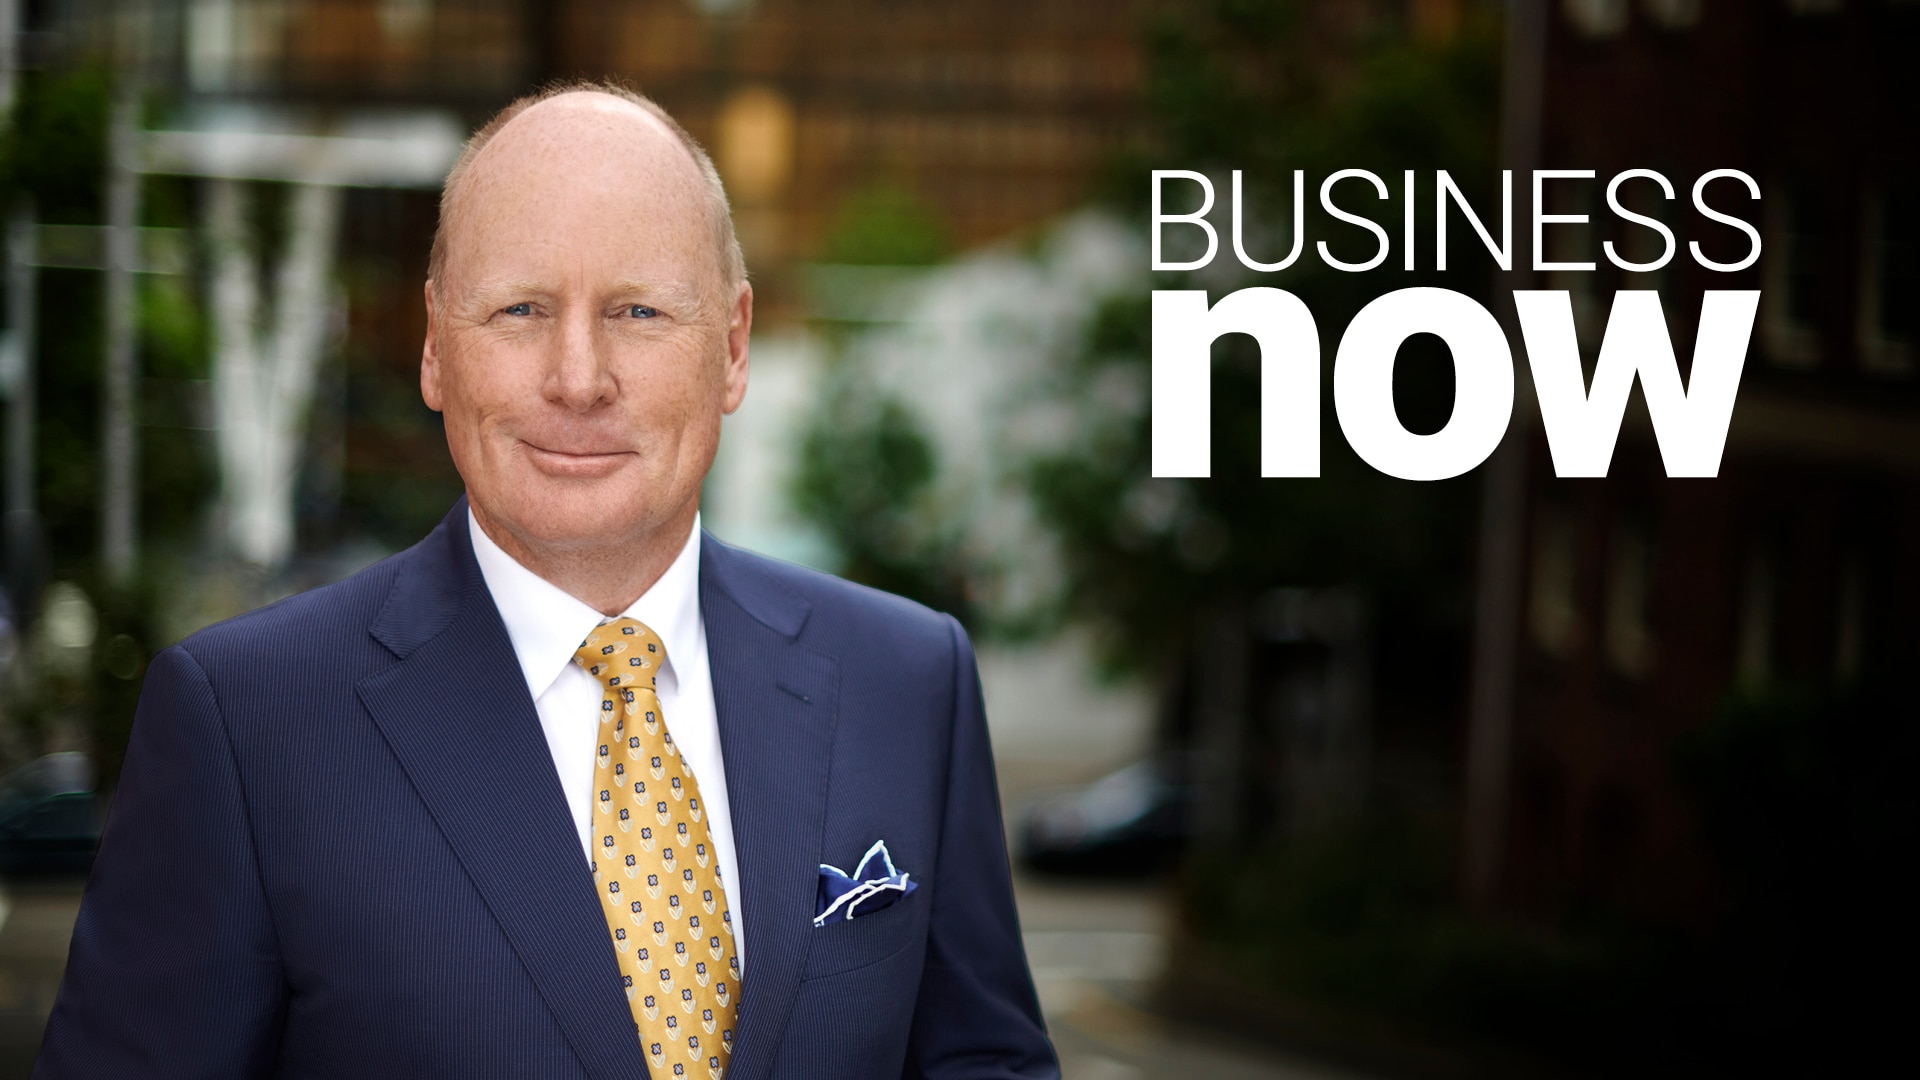 Business Now with Ross Greenwood